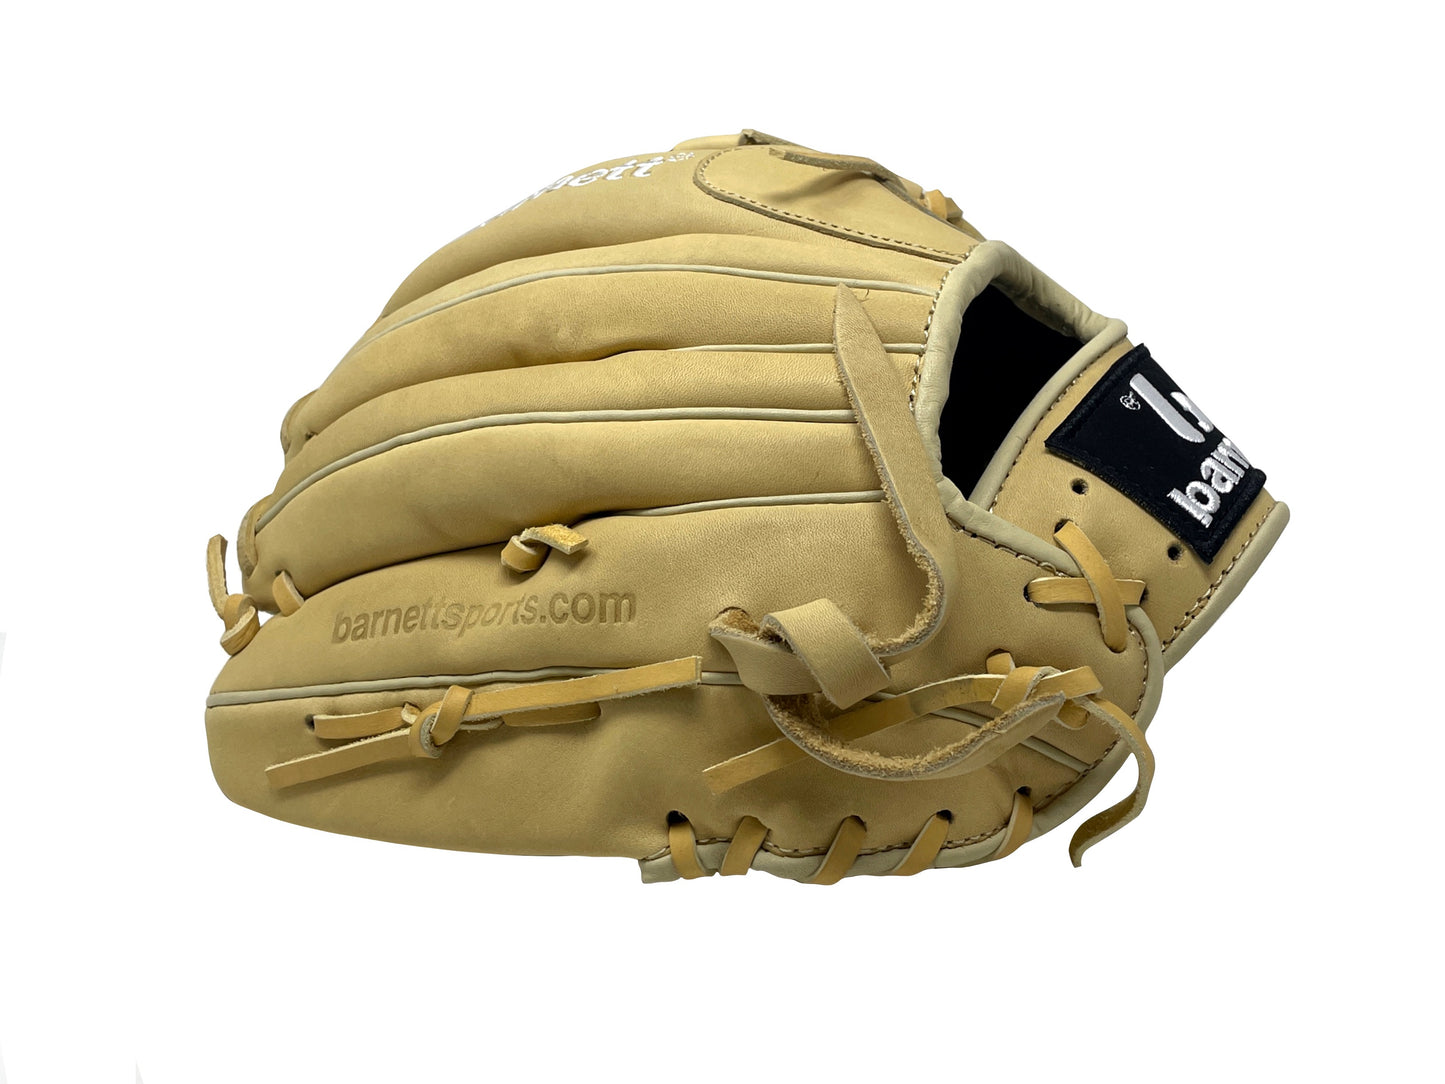 FL-120 High quality, leather baseball glove, infield/outfield / pitcher 12", Beige